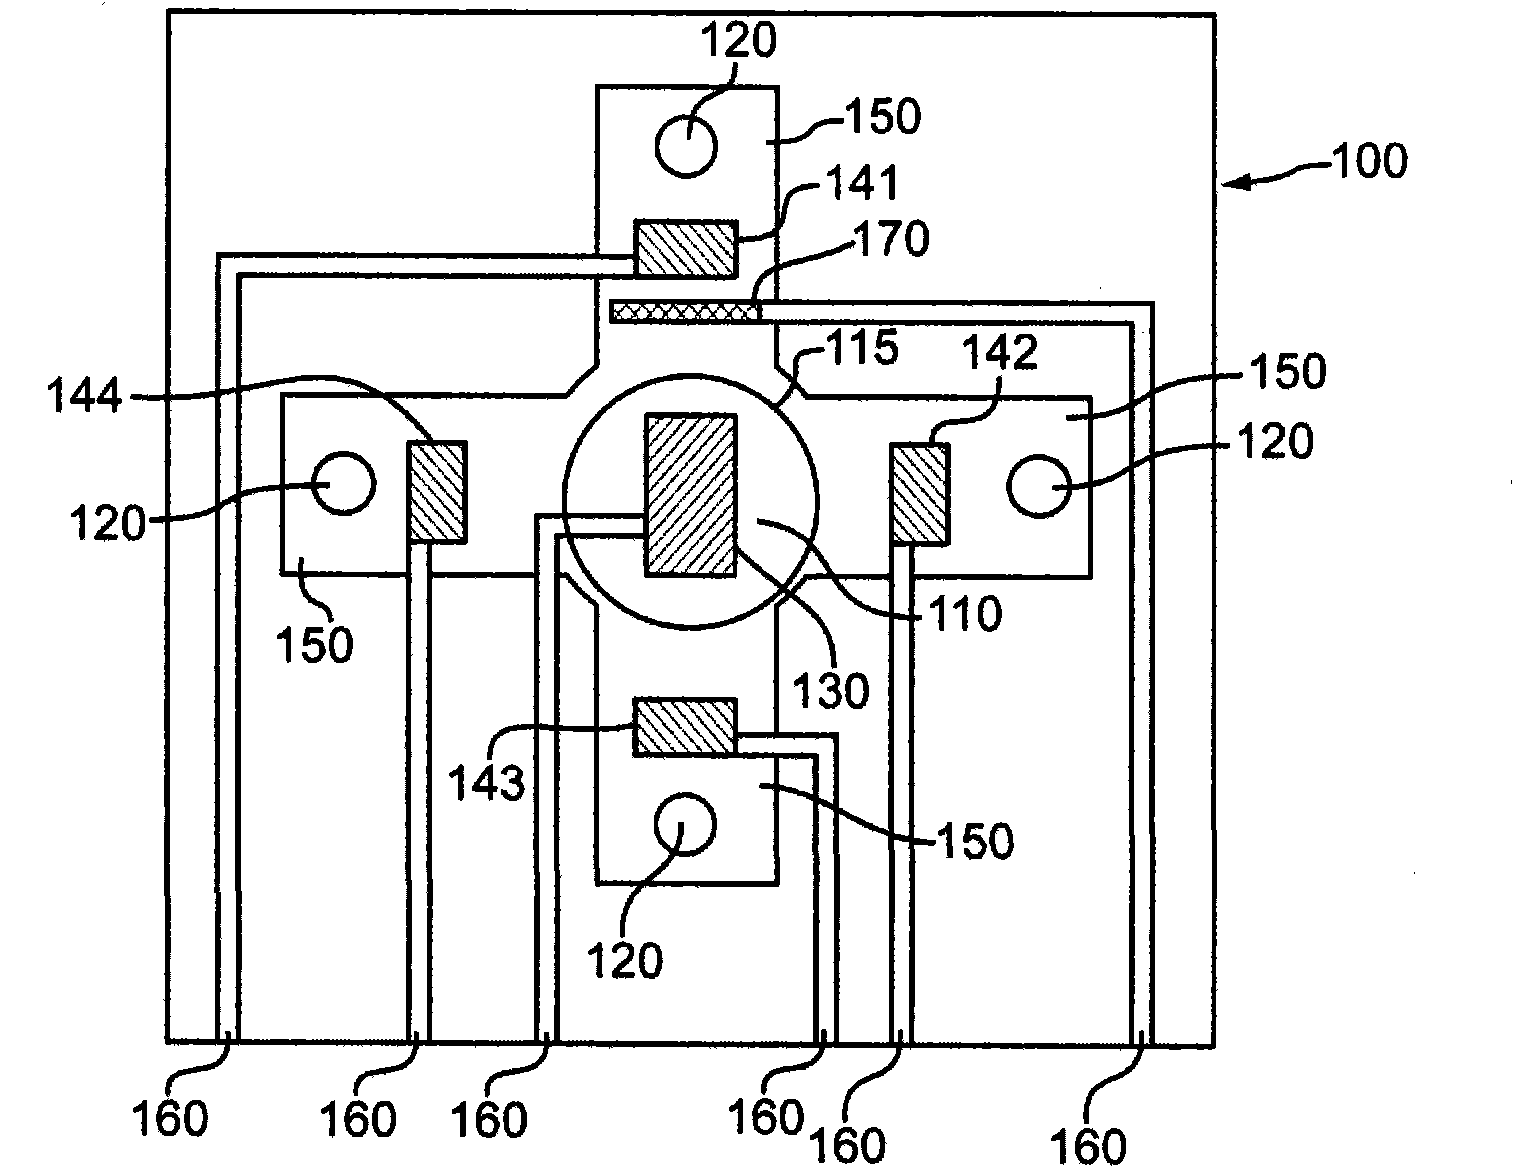 Multi-region and potential test sensors, methods, and systems